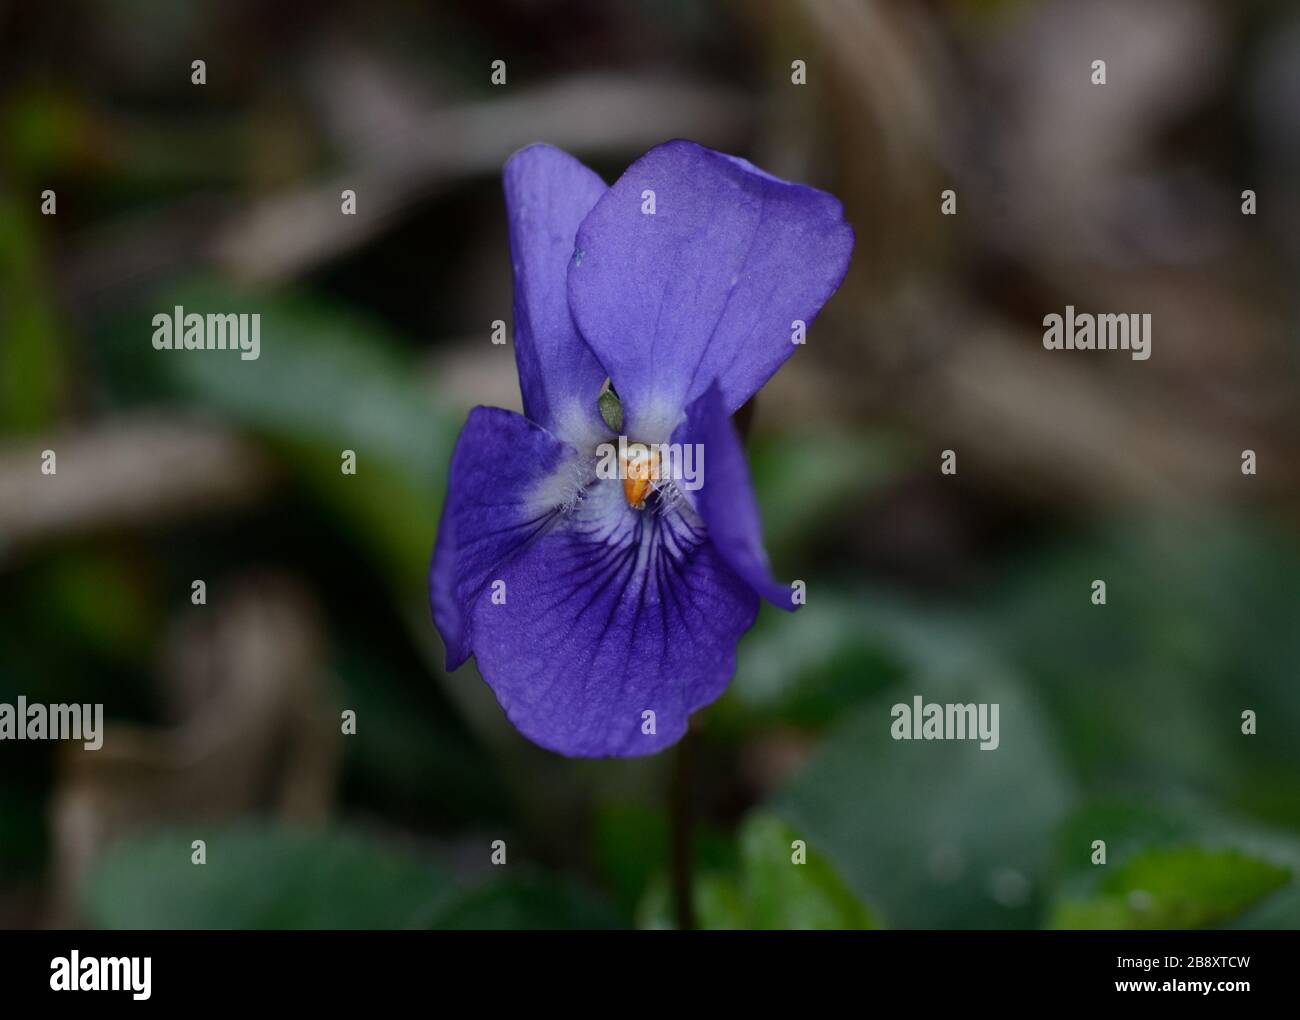 close-up of purple violet flower on a country meadow on blurred background Stock Photo